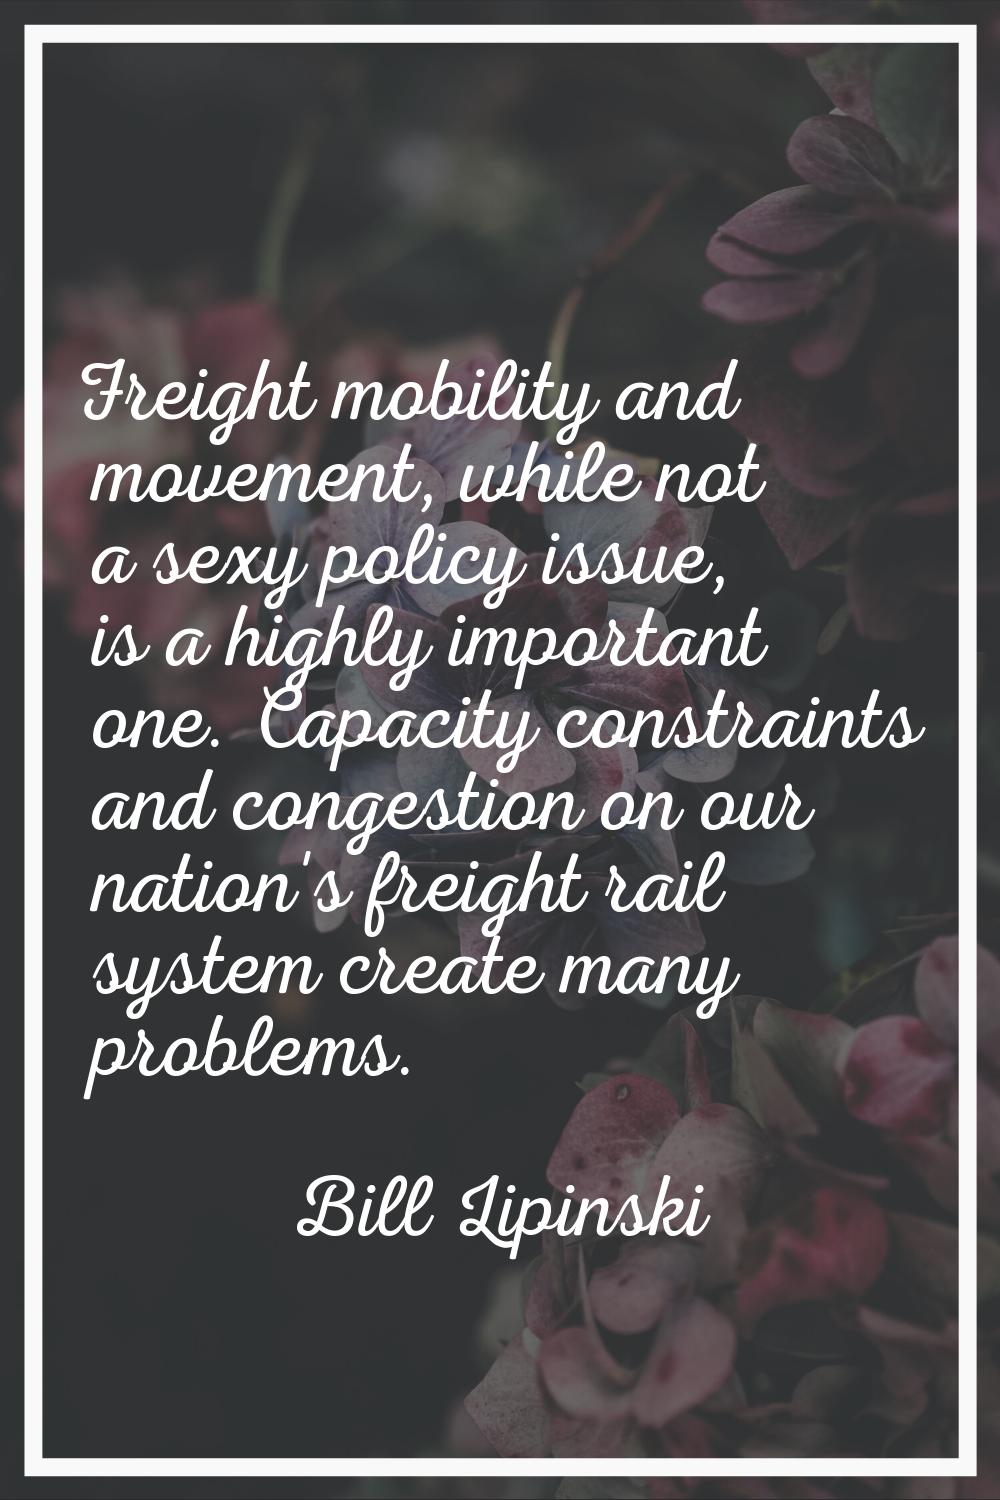 Freight mobility and movement, while not a sexy policy issue, is a highly important one. Capacity c